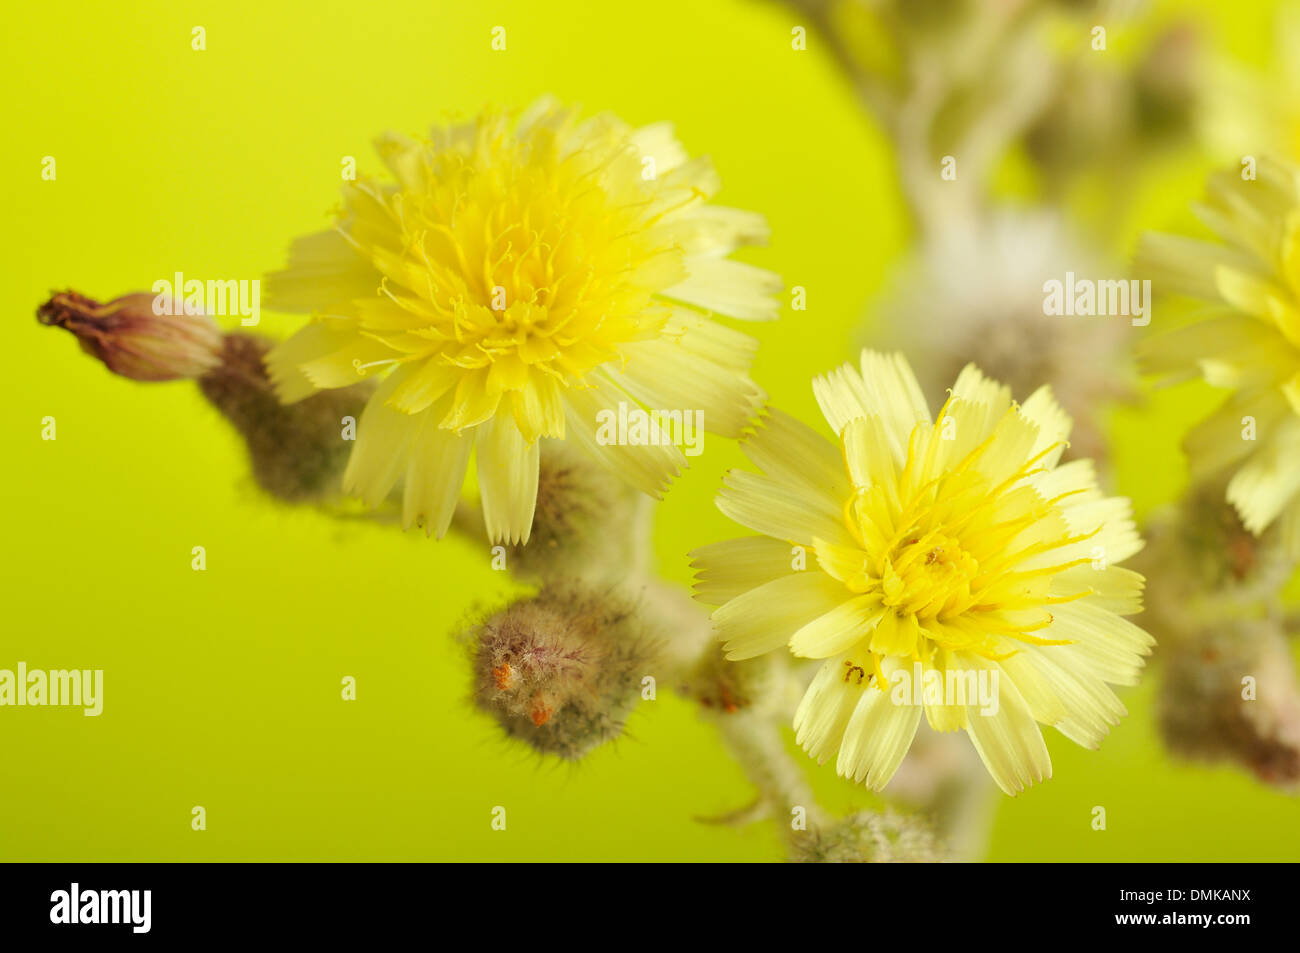 Mouse-ear hawkweed, Hieracium pilosella (Asteraceae), horizontal portrait of yellow flowers with nice out of focus background. Stock Photo